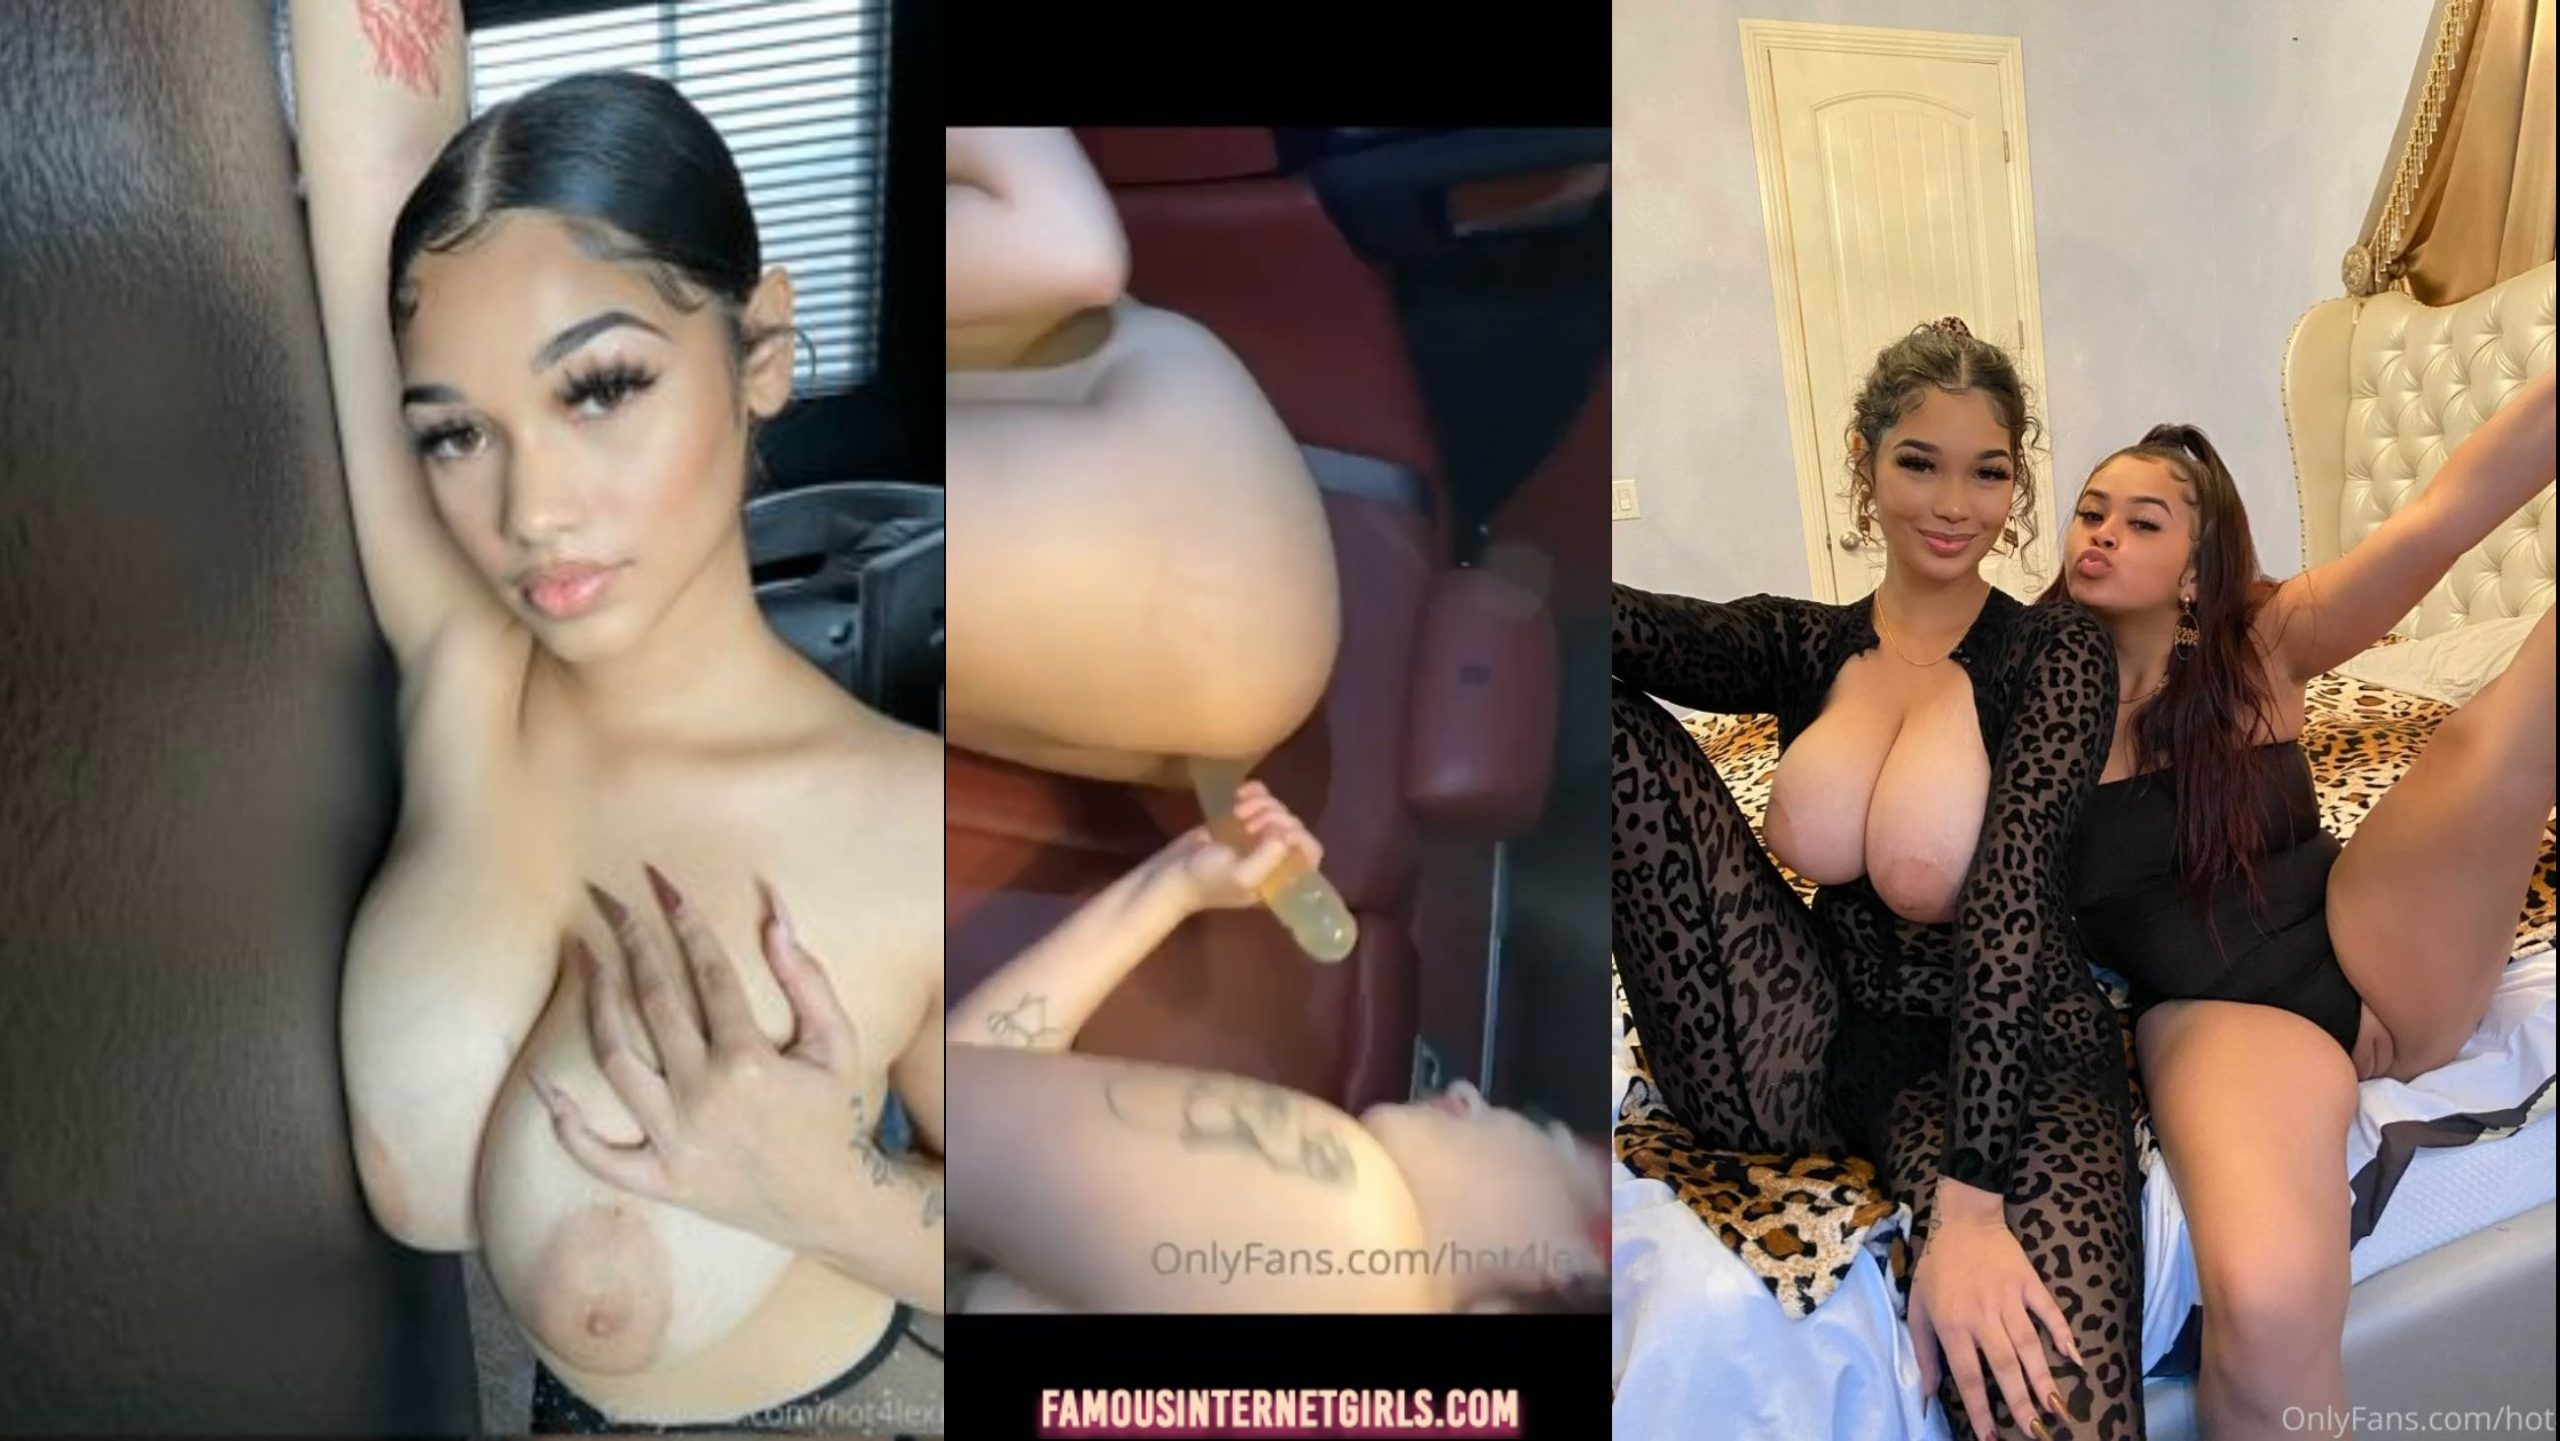 65 Best OnlyFans Girls With Inexpensive Subscriptions: The Hottest OF Creators and Accounts of 2021